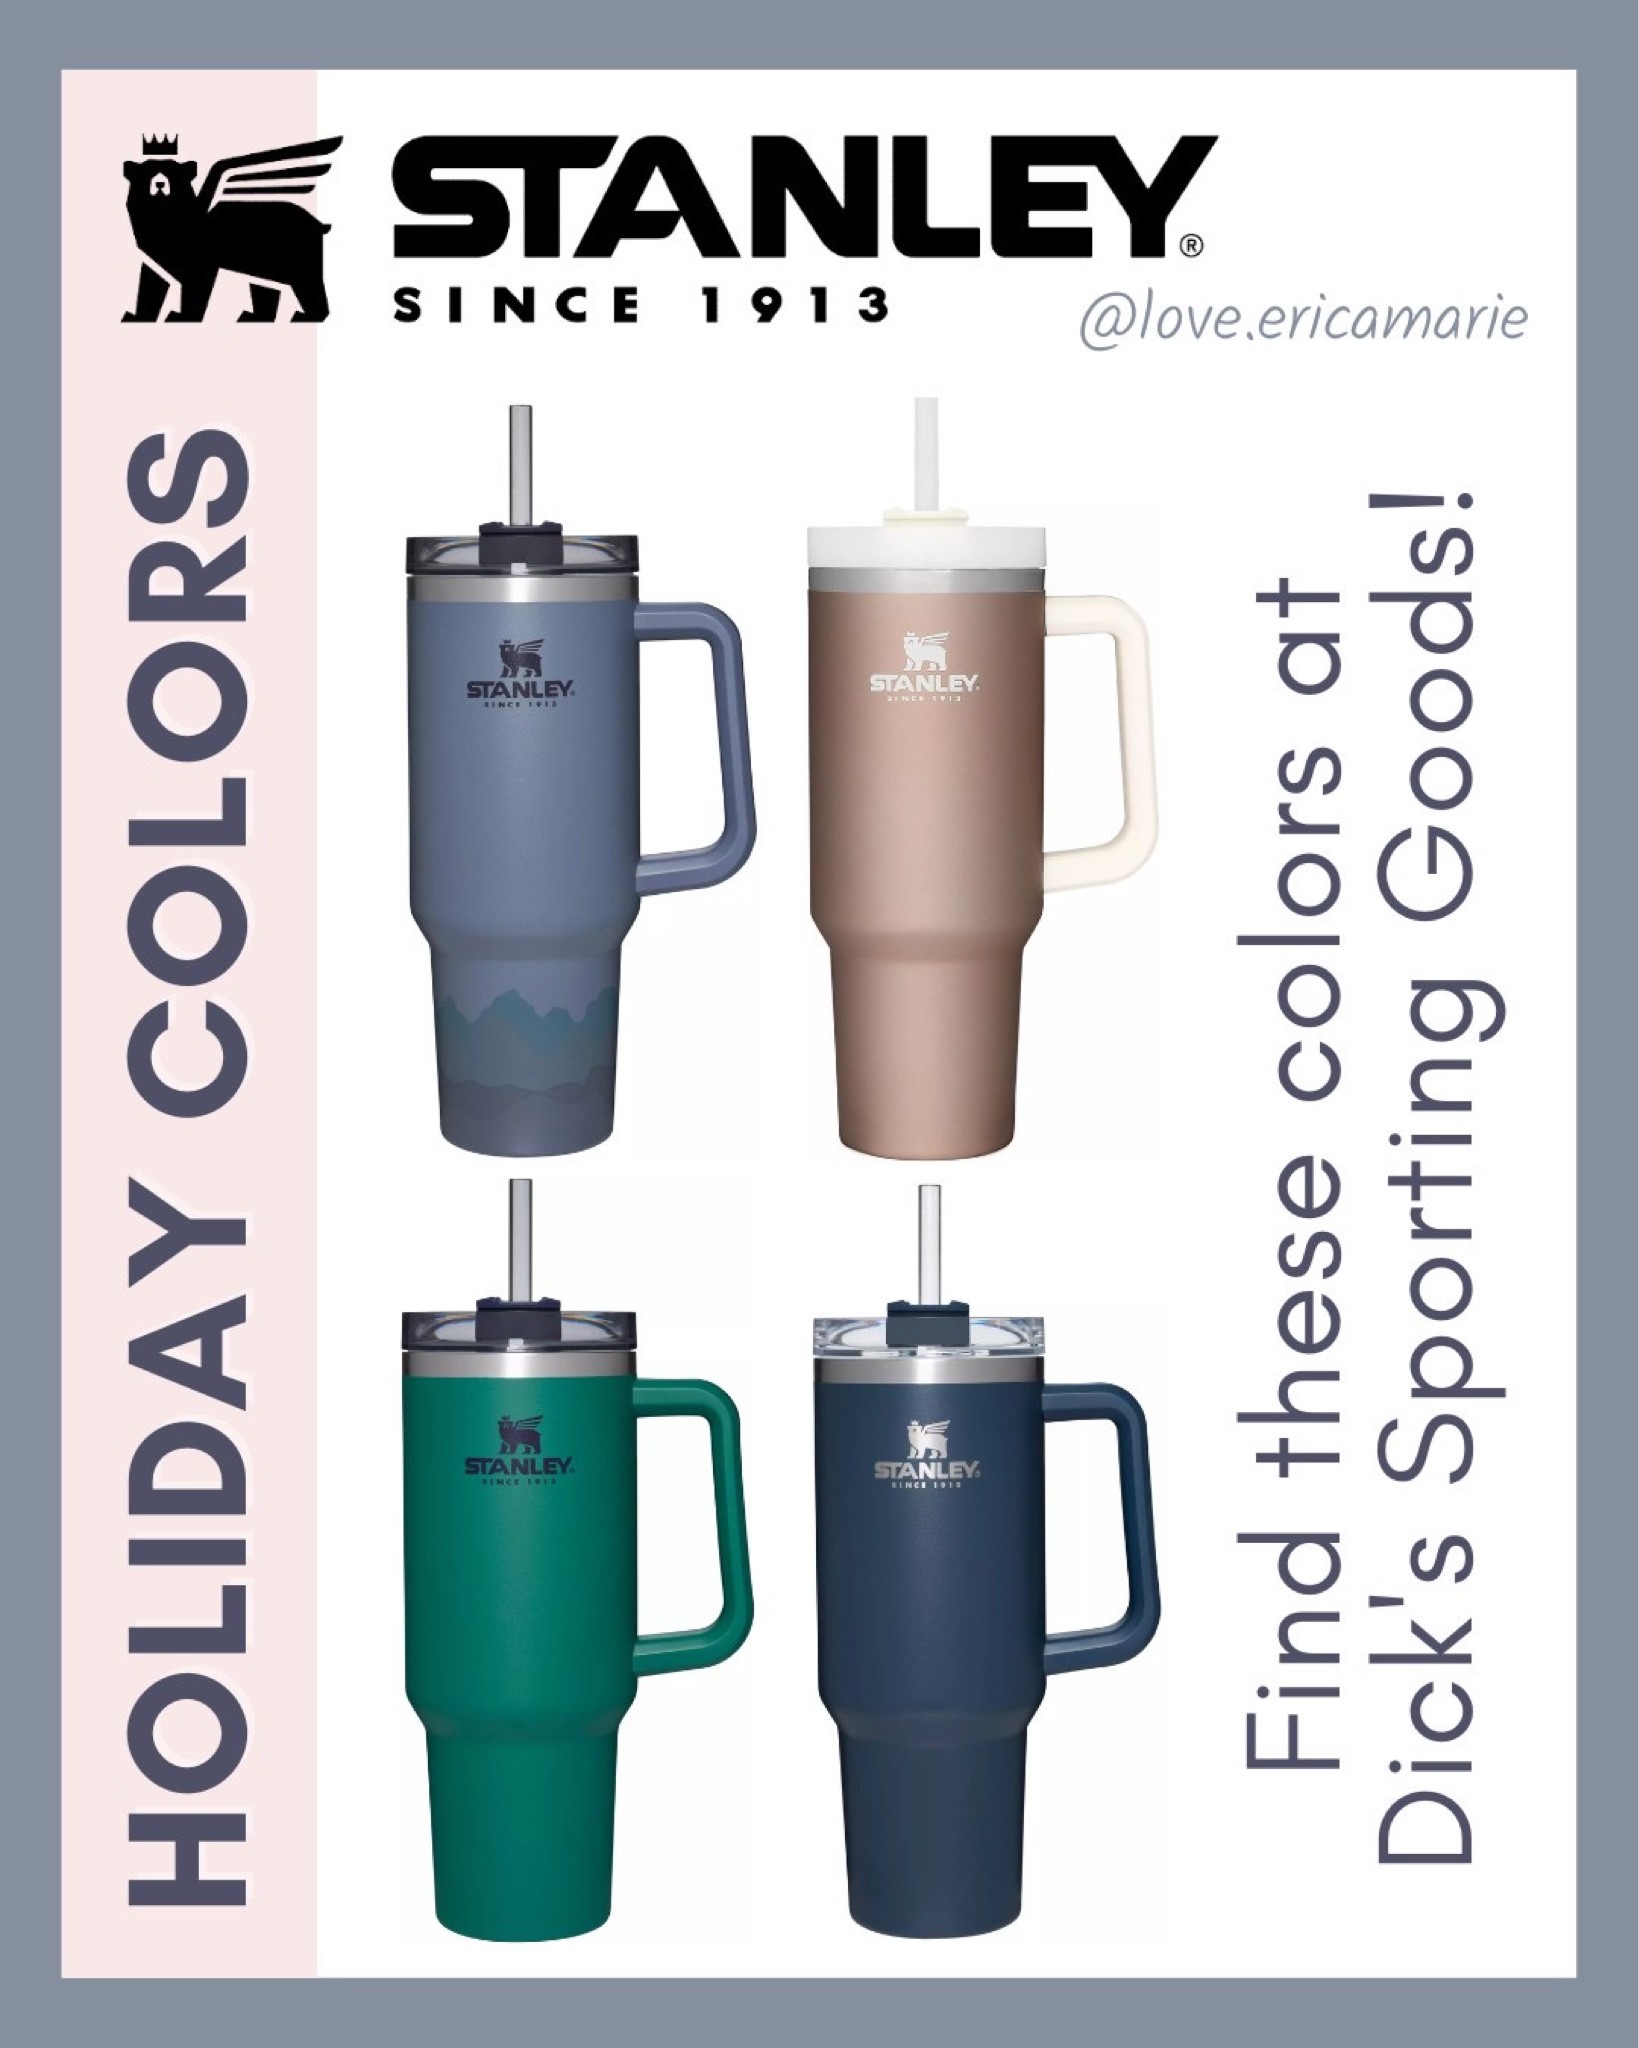 Stanley Quencher restocked at Dick's Sporting Goods with new colors